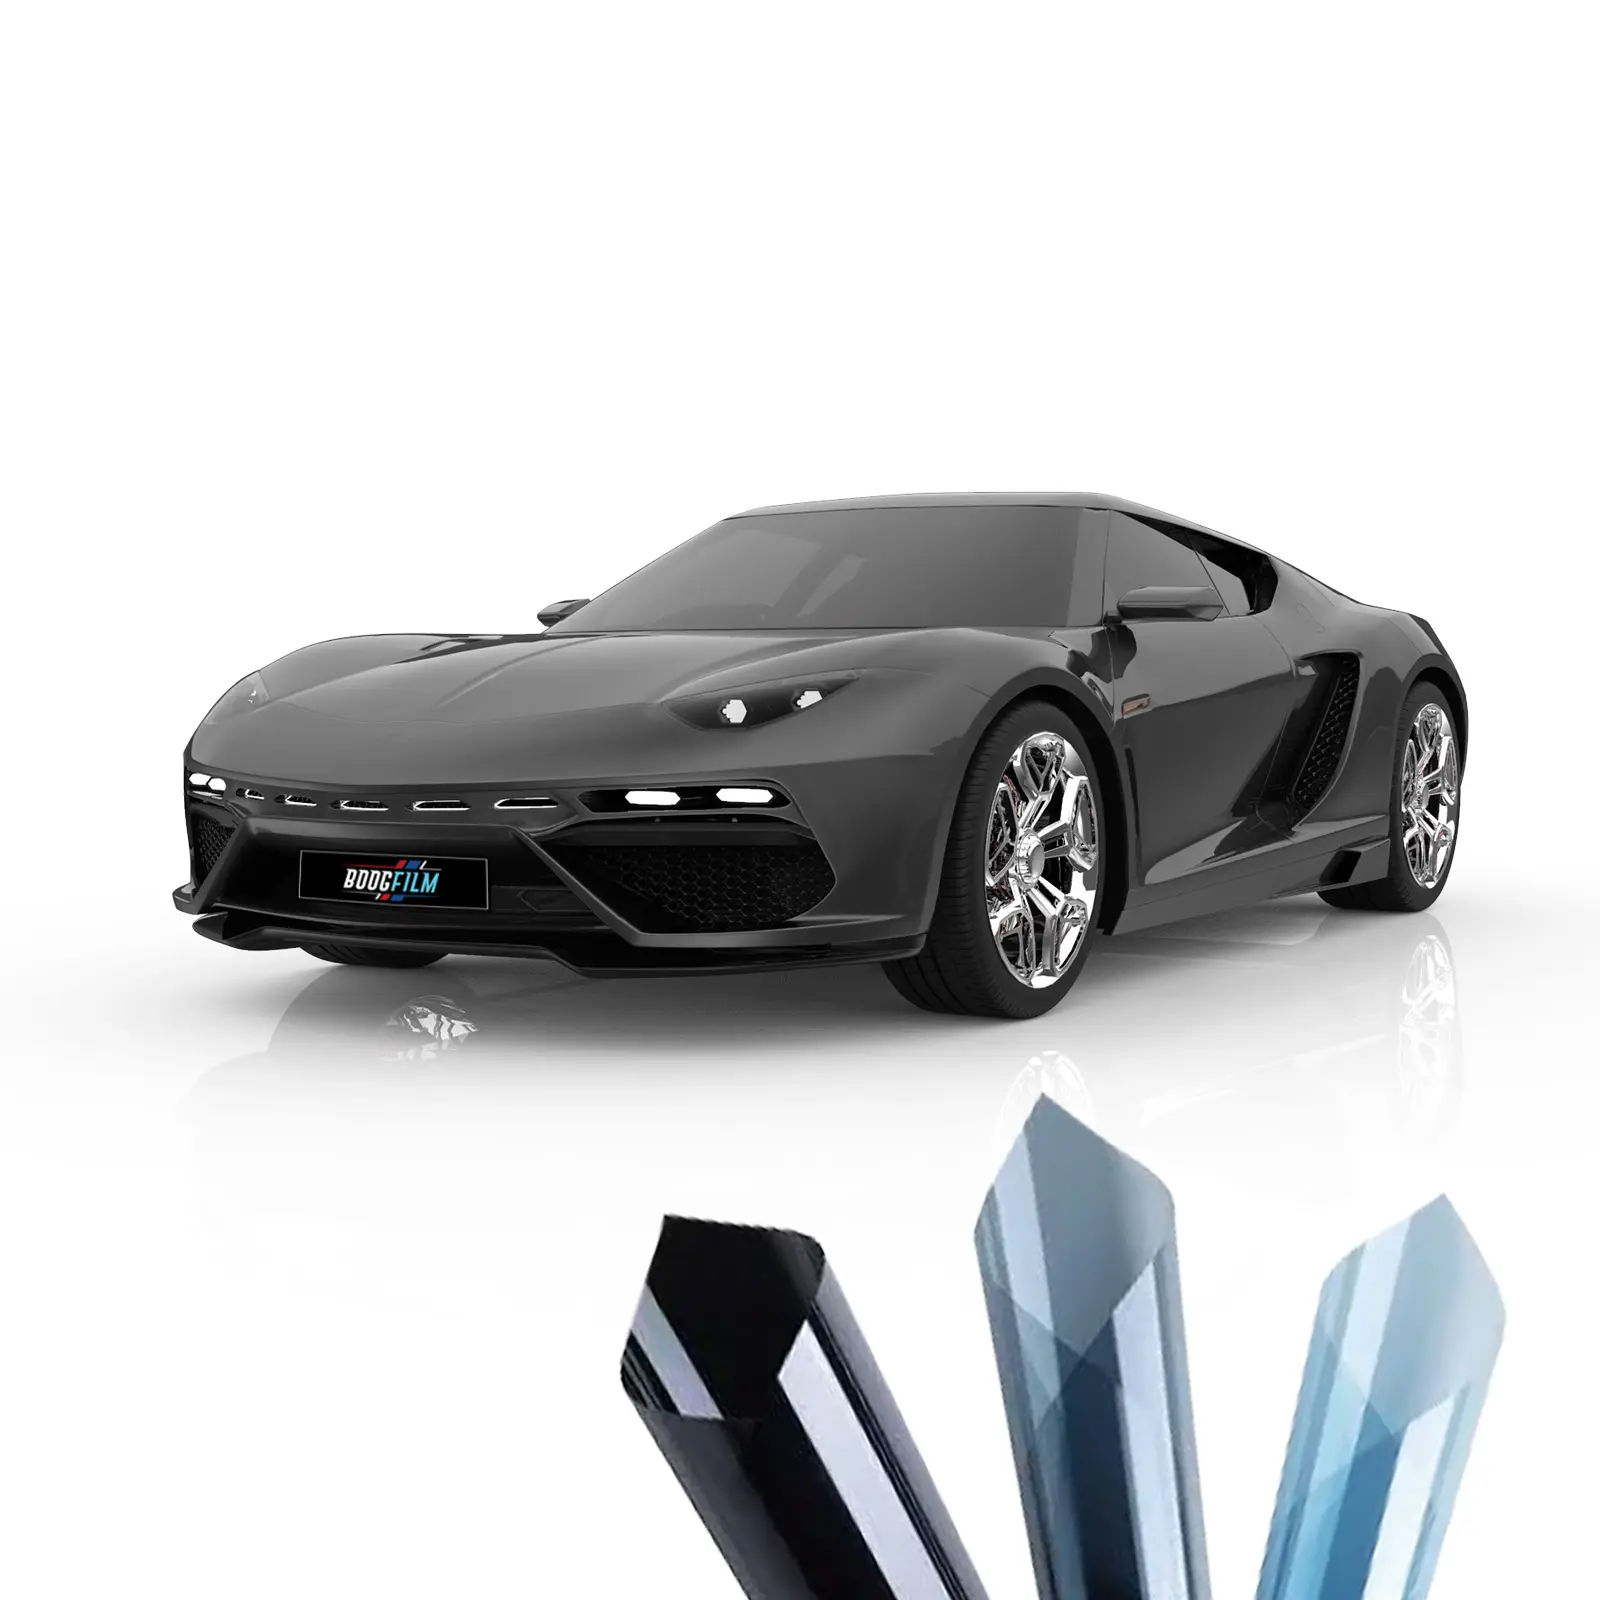 New Arrival 8.5mil TPU PPF Protection Film Self-Healing Sand and Anti-Scratch Vinyl Wrap for Car Body Protection